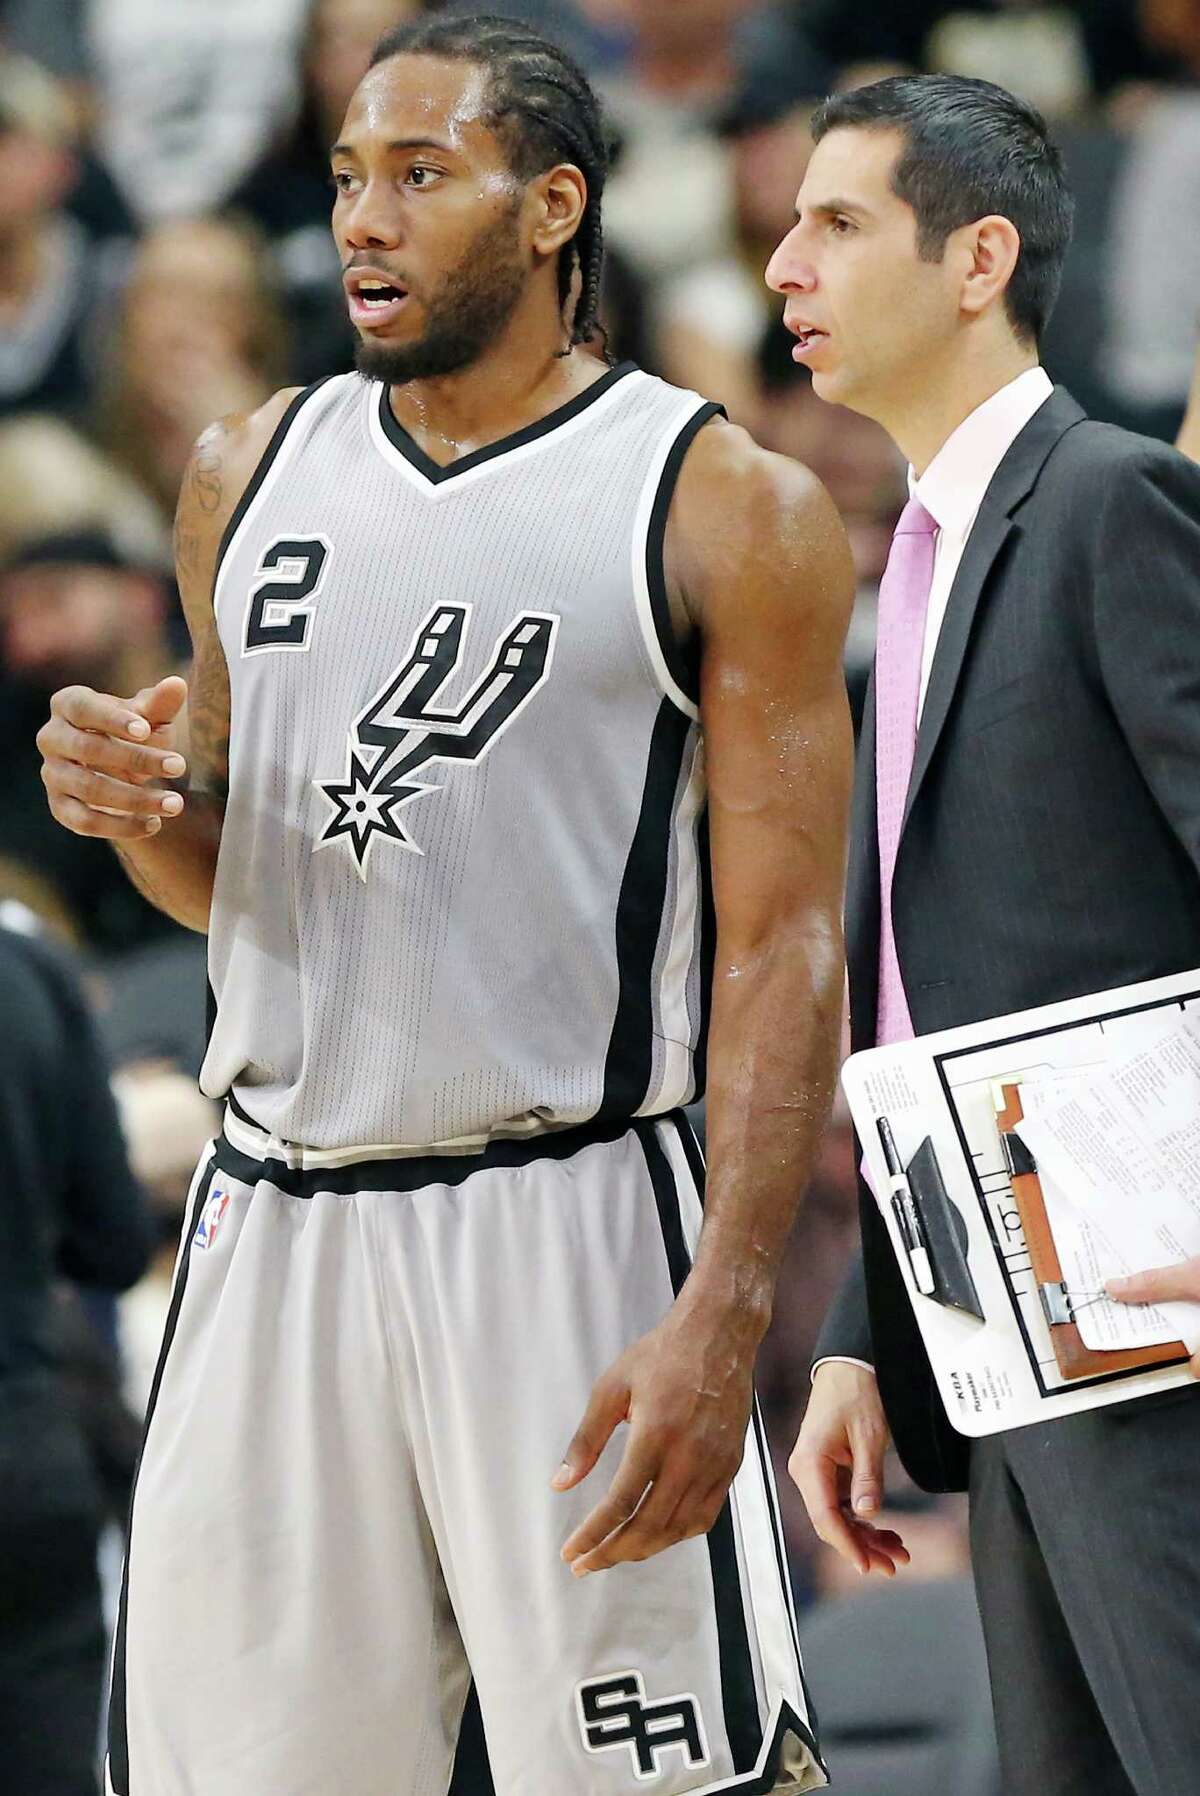 San Antonio Spurs' Kawhi Leonard talks with assistant coach James Borrego during second half action Saturday Jan. 2, 2016 at the AT&T Center. The Spurs won 121-103.